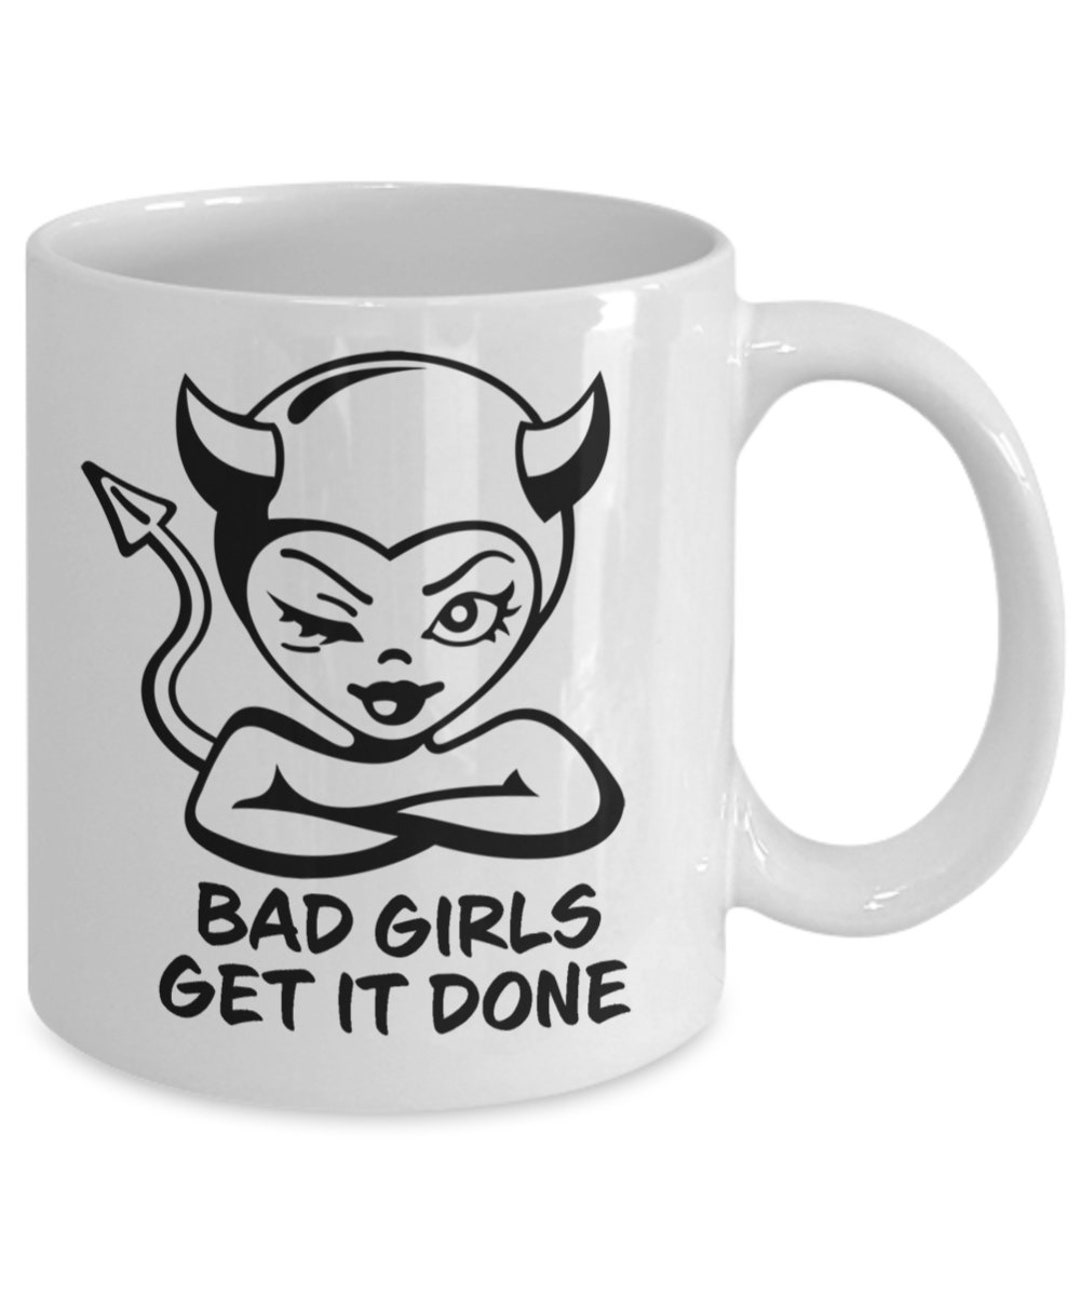 Bad Girls Get It Done / Funny Sex Gift / Swinger Lifestyle pic